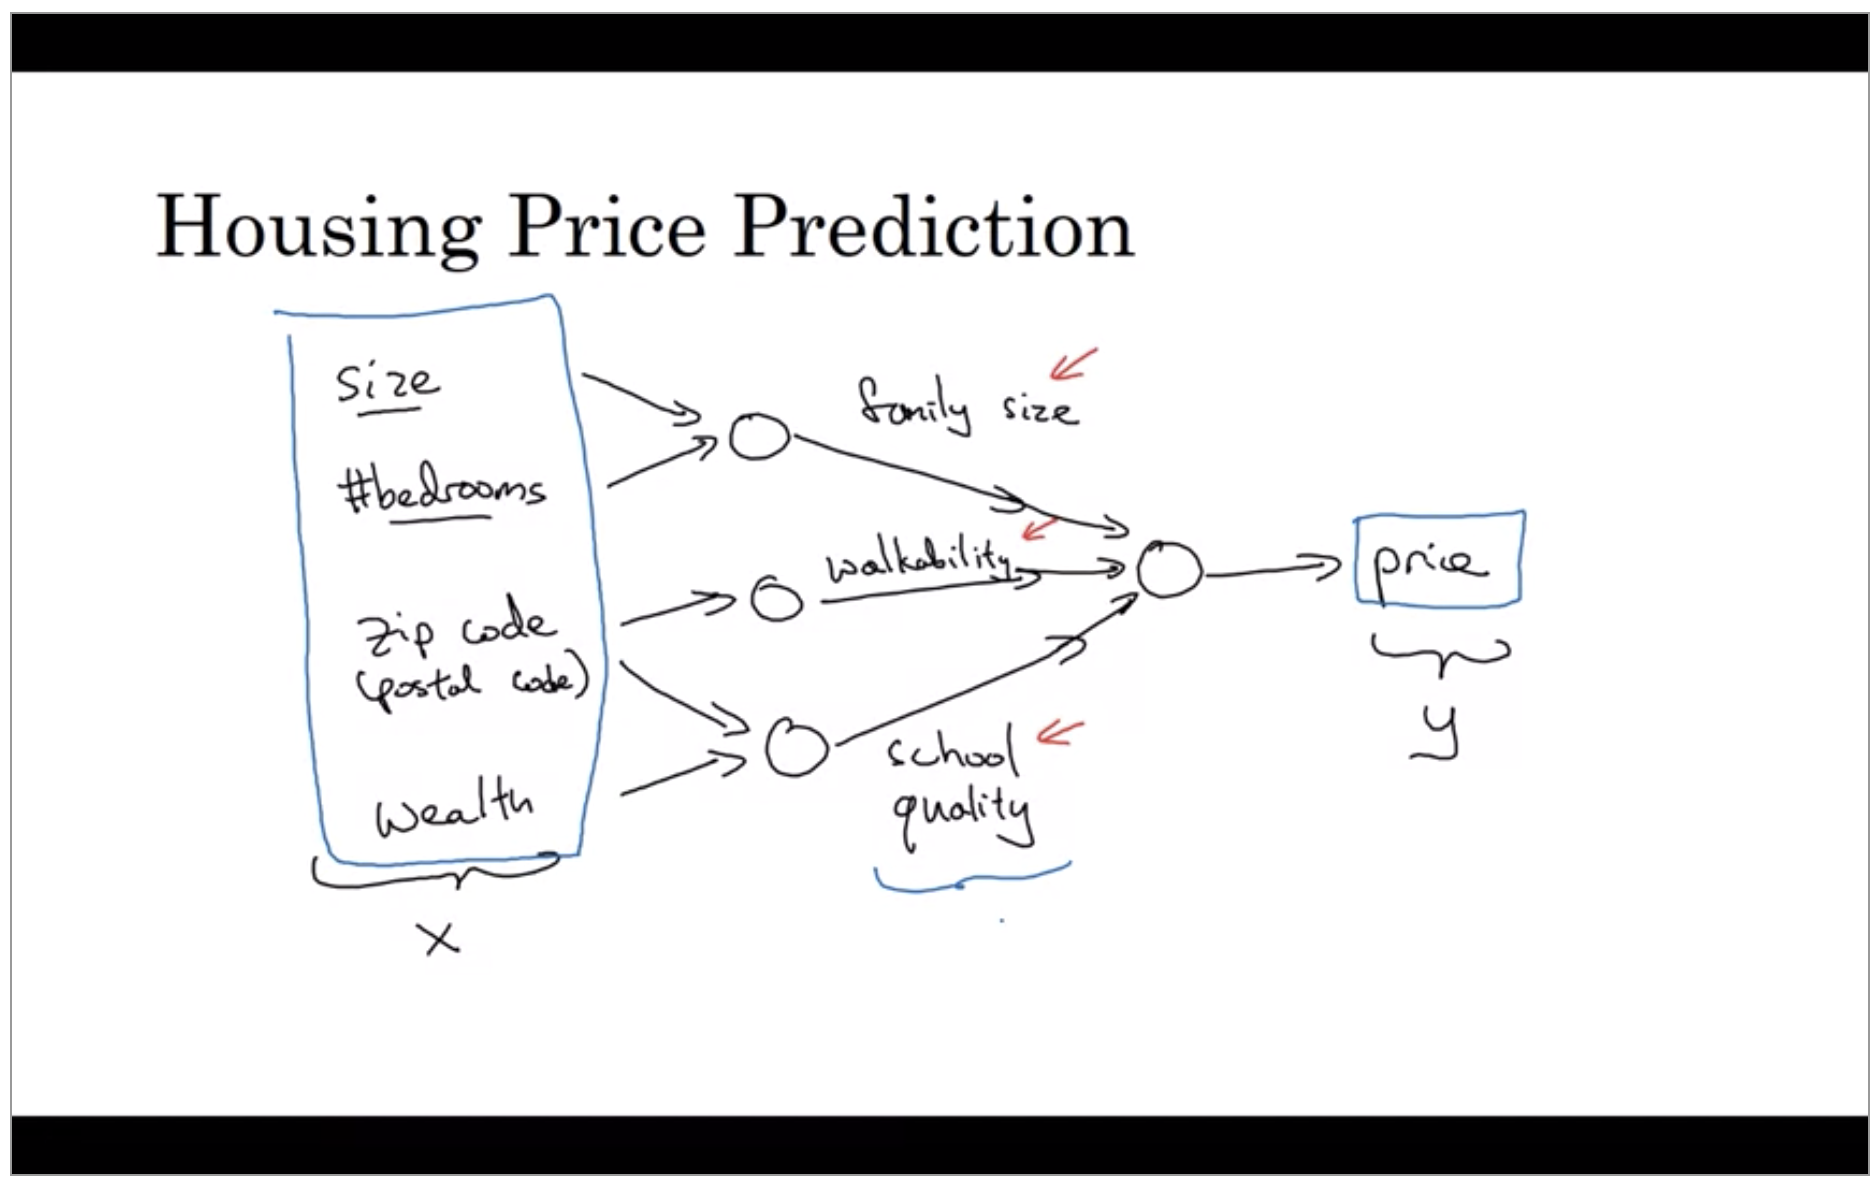 housing-price-prediction-2.png